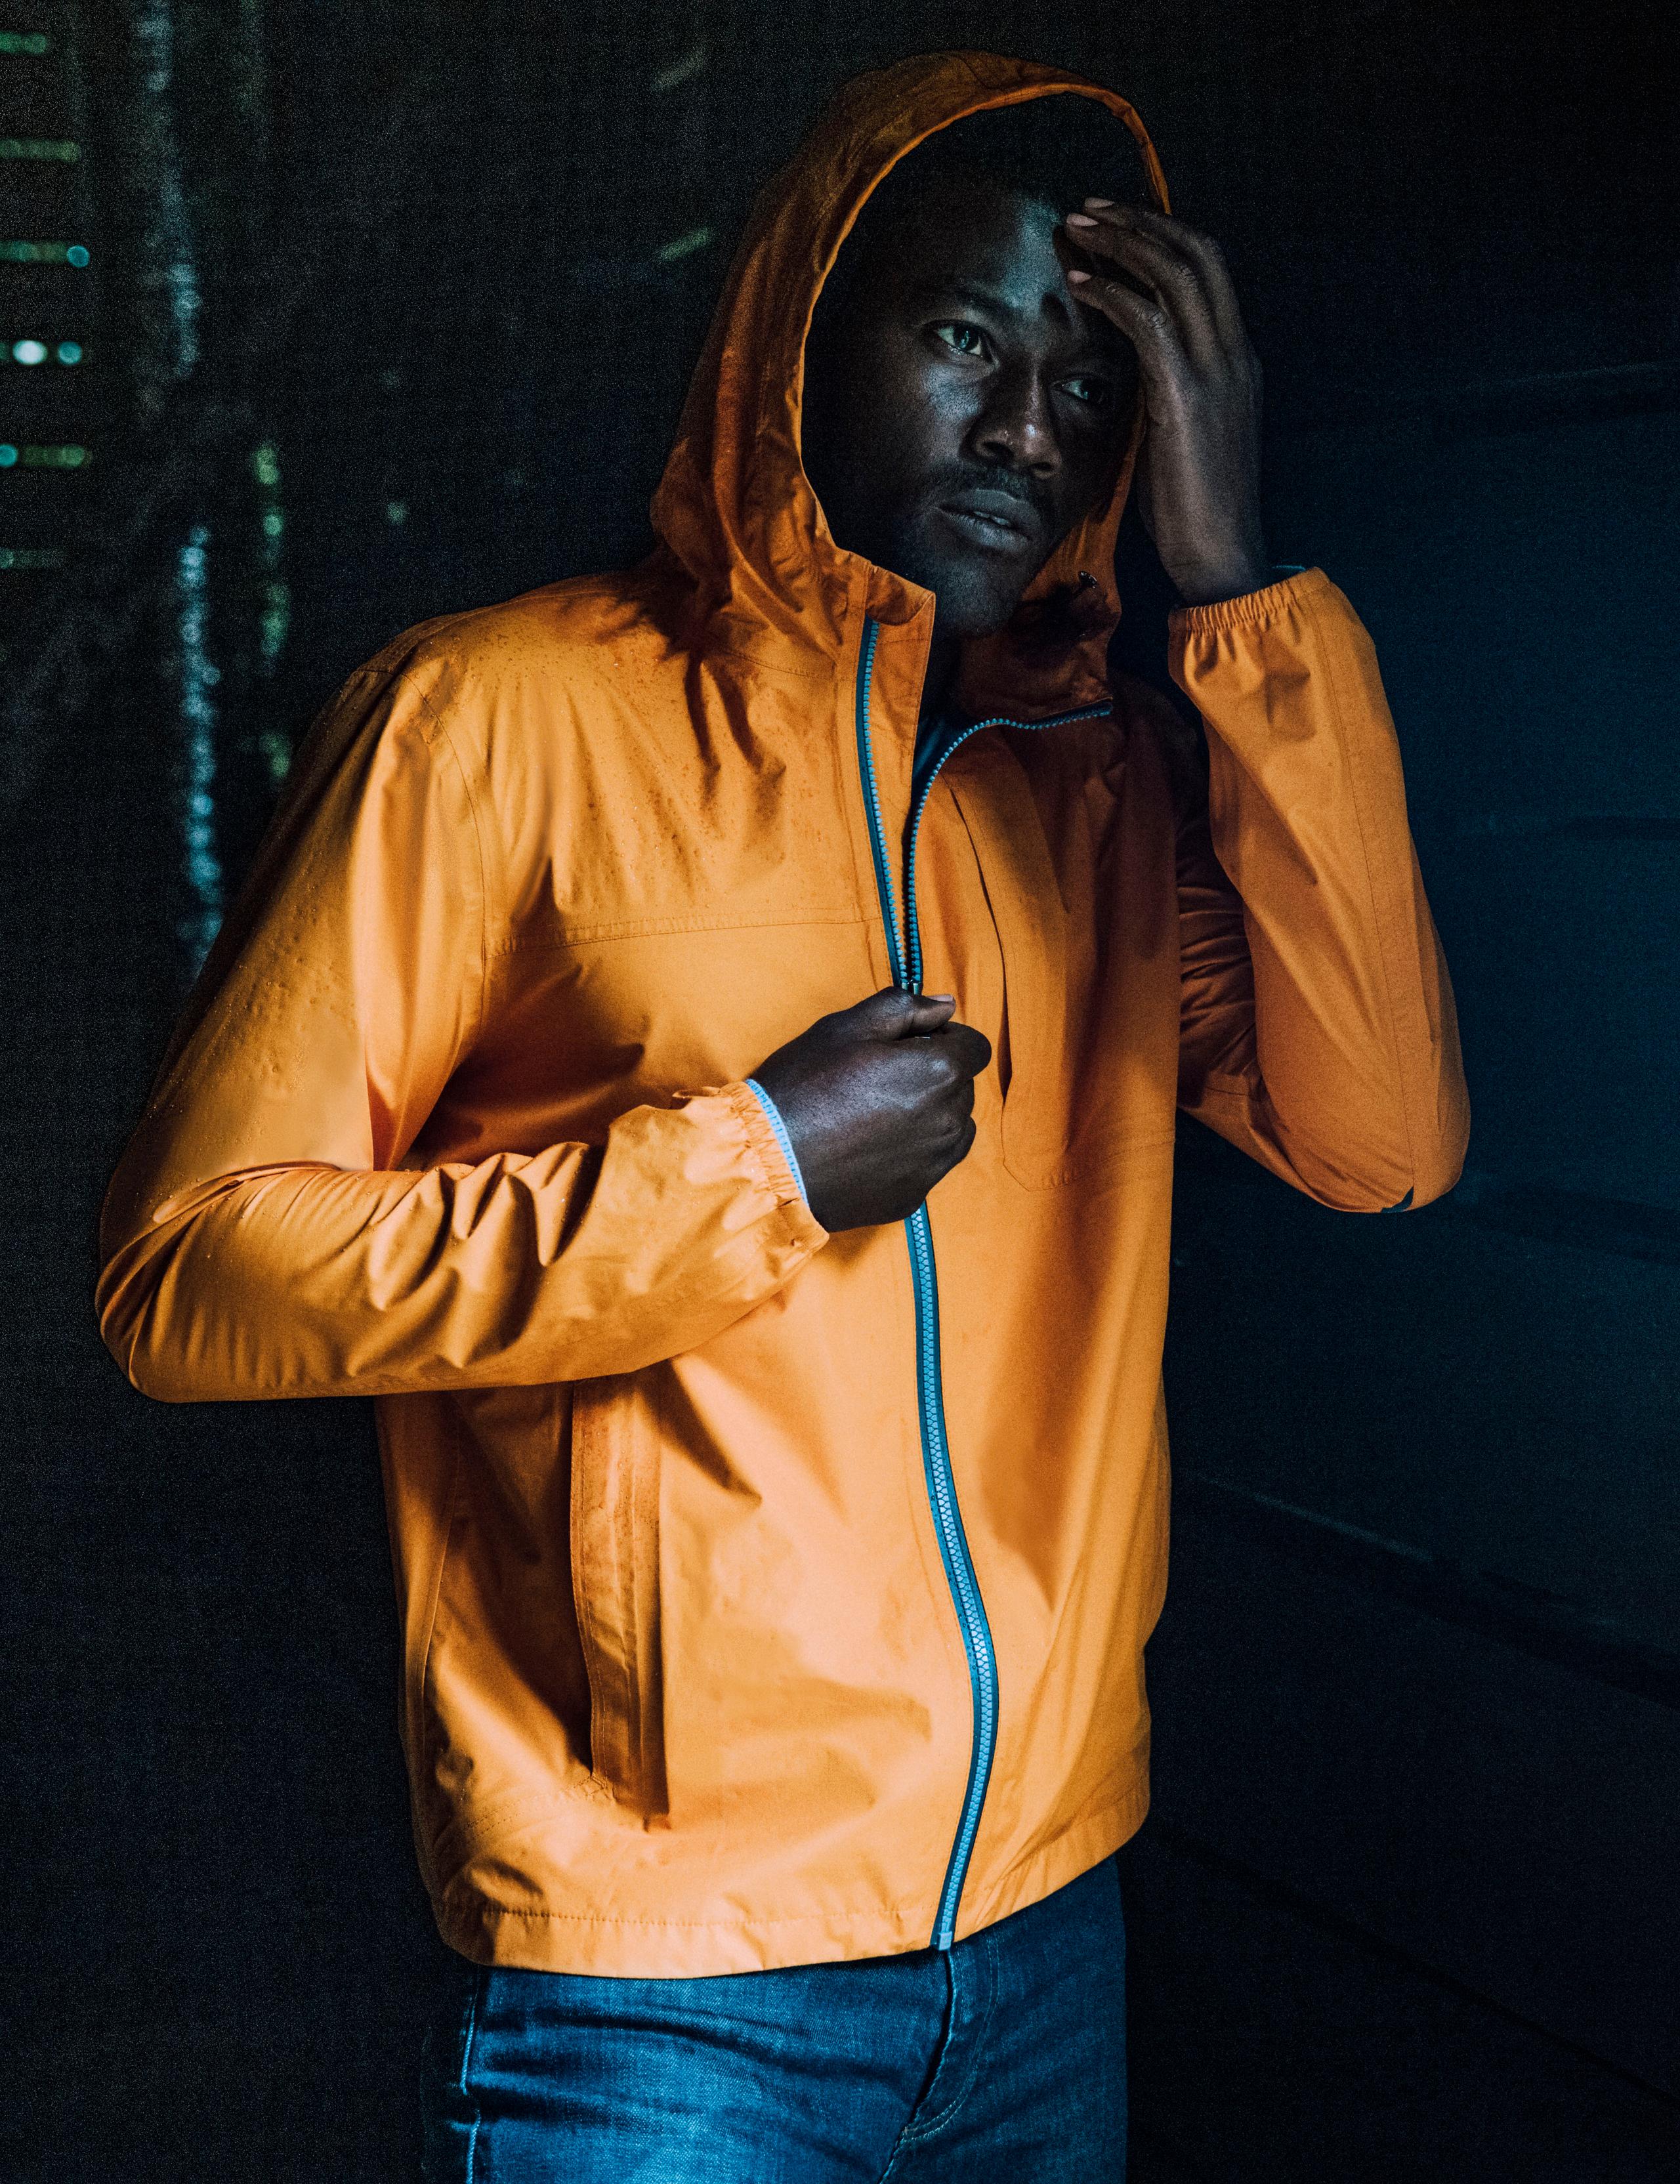 Remy peering into the distance while adorned with the Midas Orange Storm All-Weather Jacket